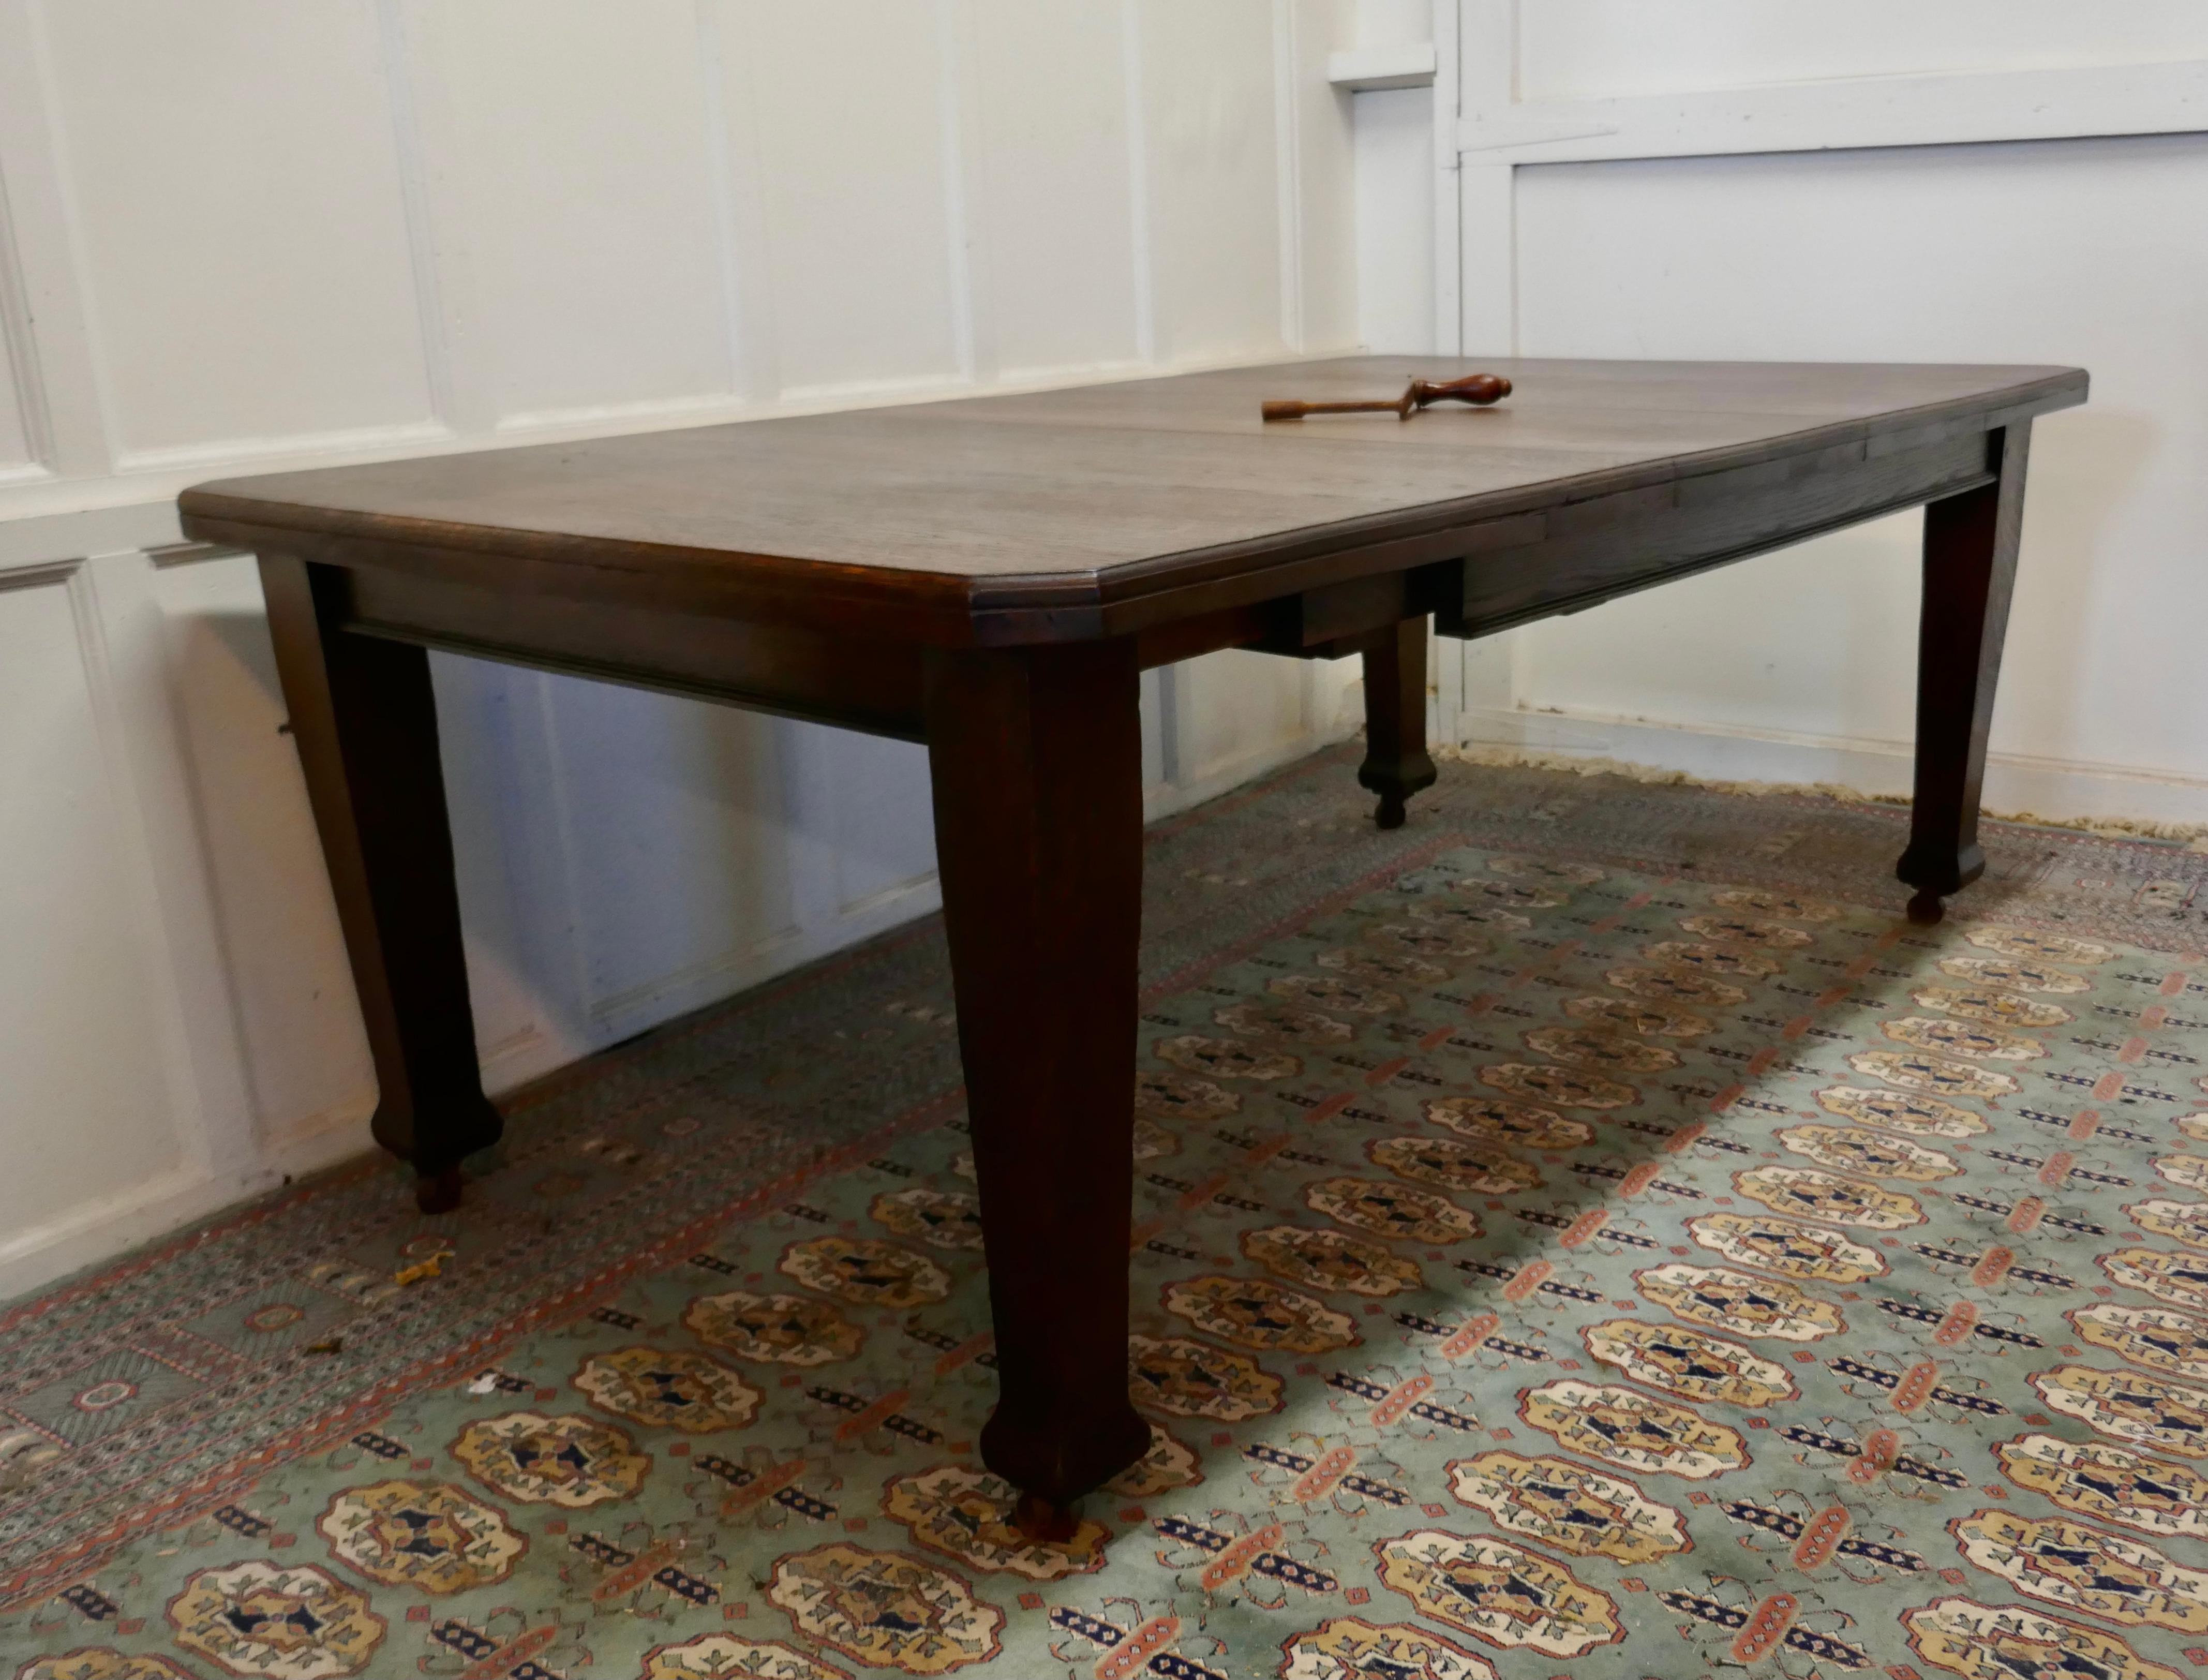 Victorian Arts and Crafts Oak Wind Out Table, Extending Dining Table In Good Condition For Sale In Chillerton, Isle of Wight